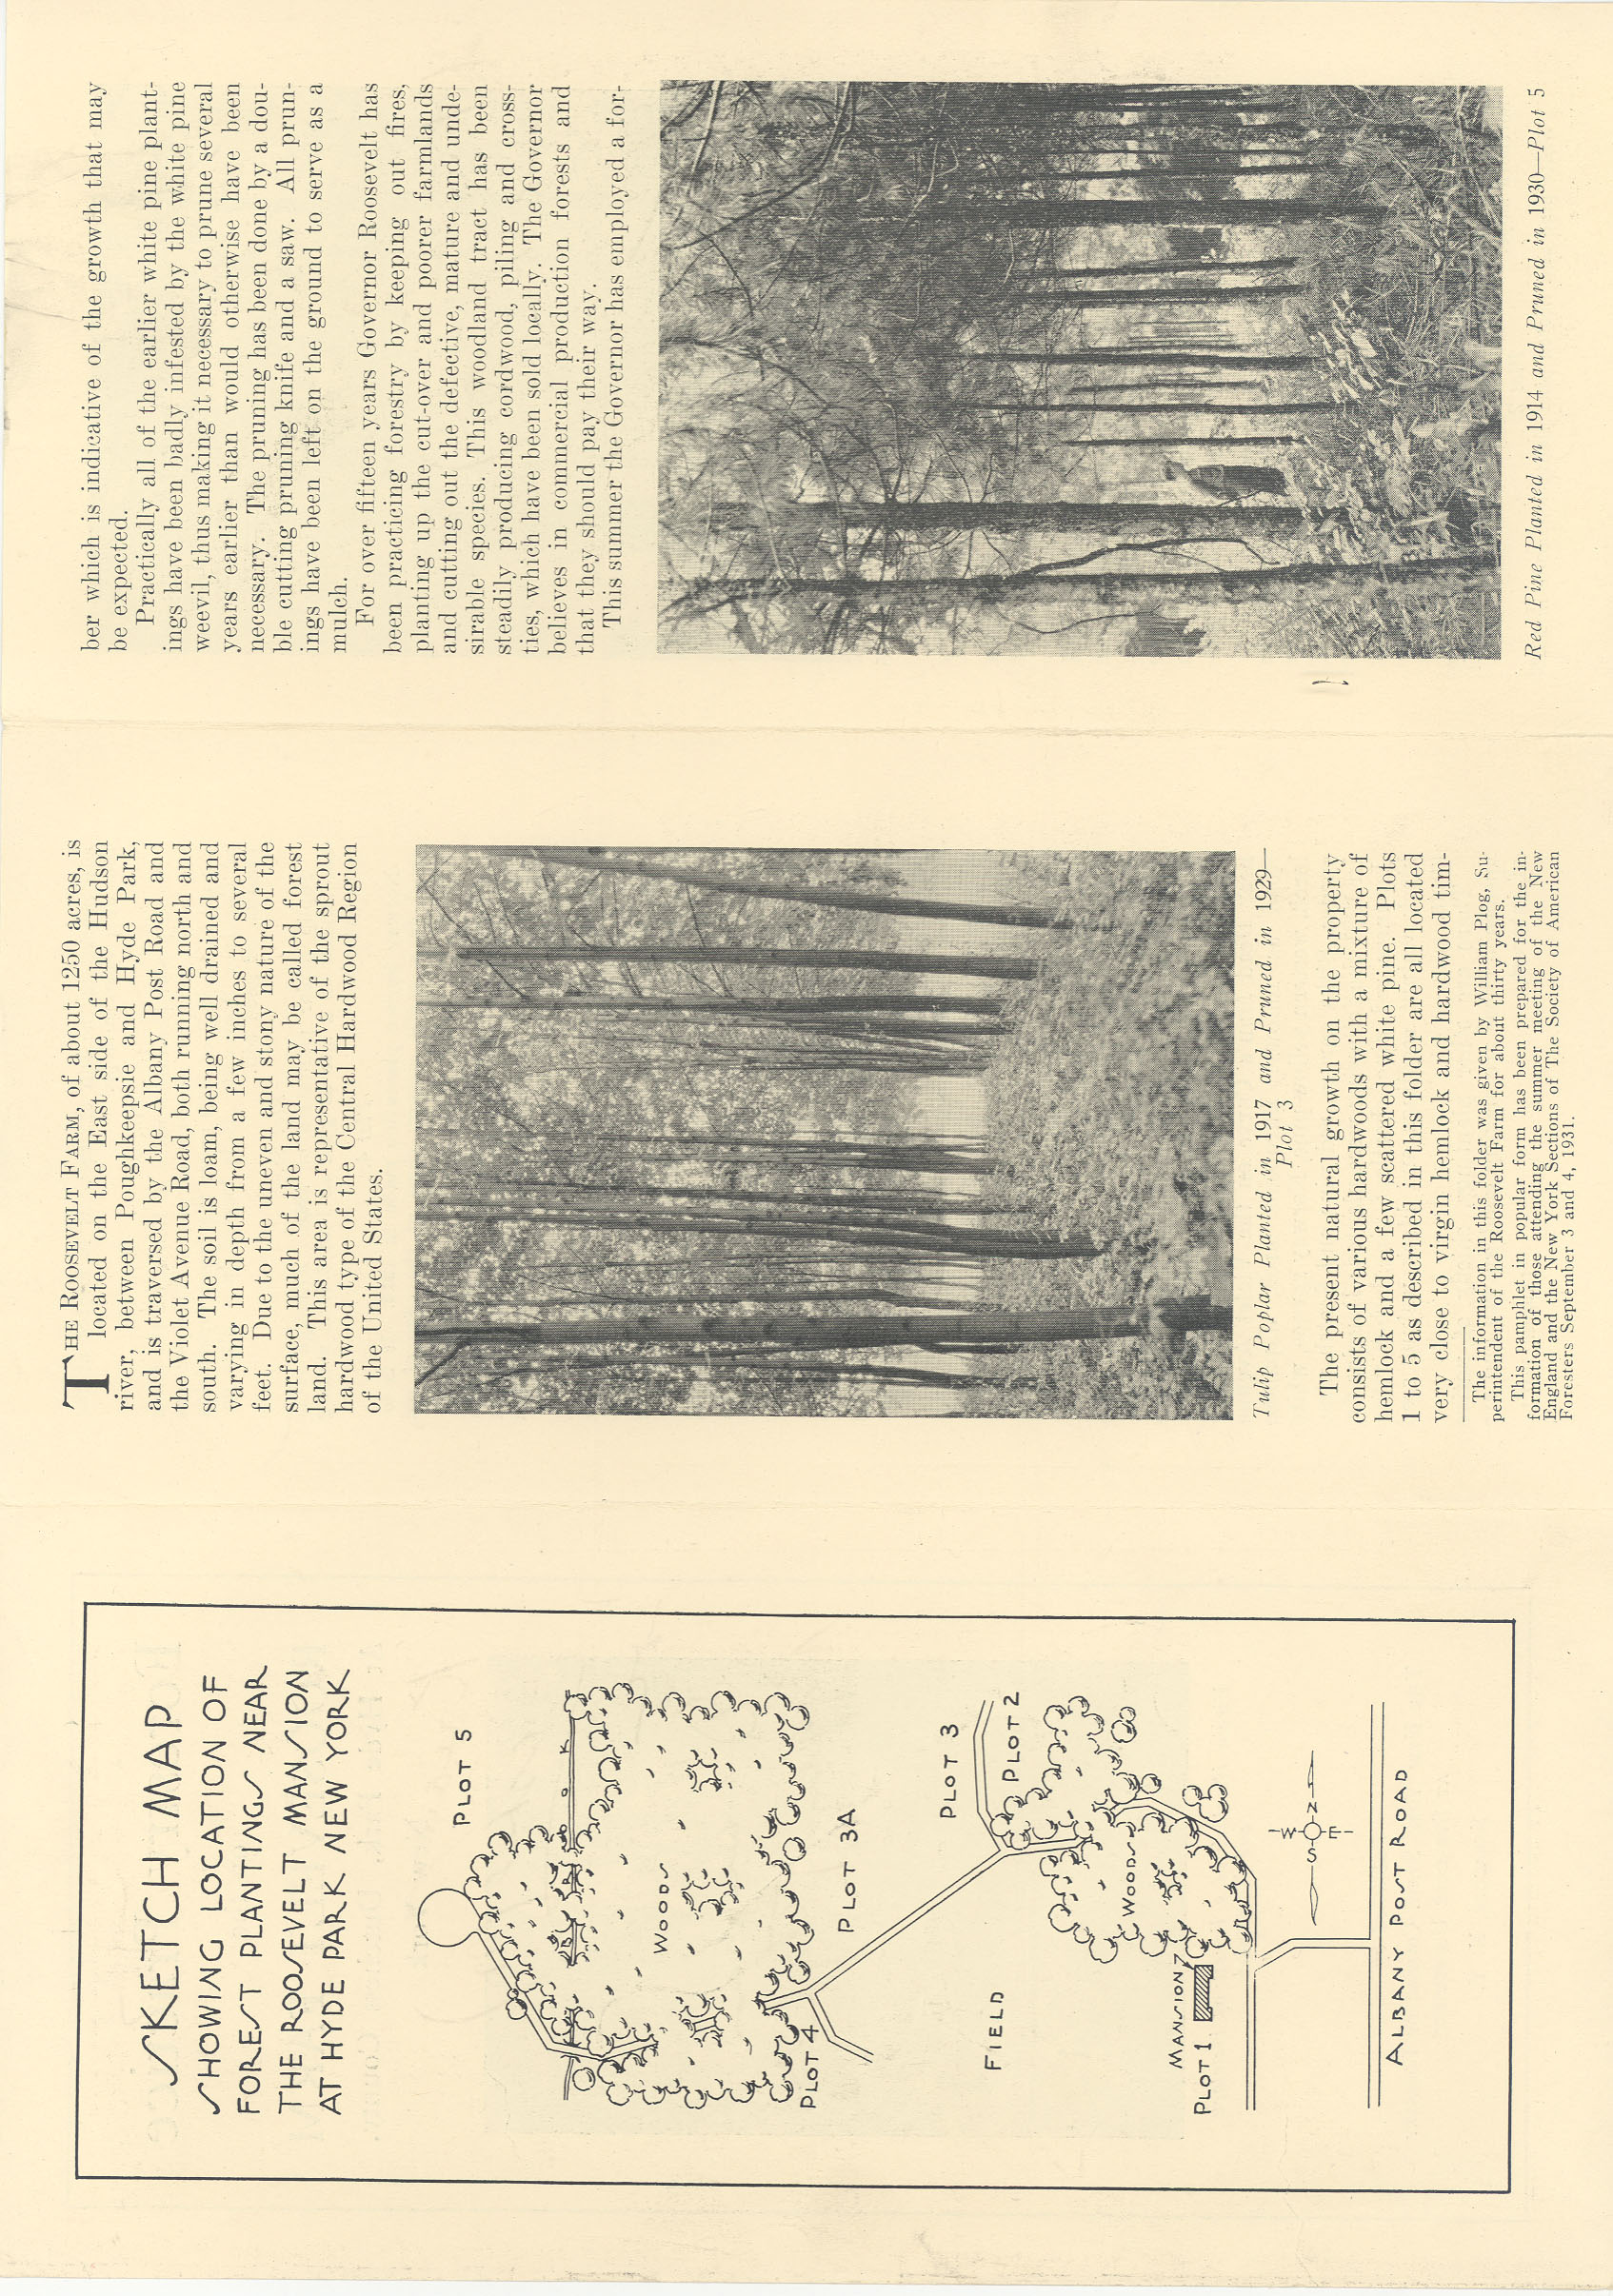 A pamphlet about forestry